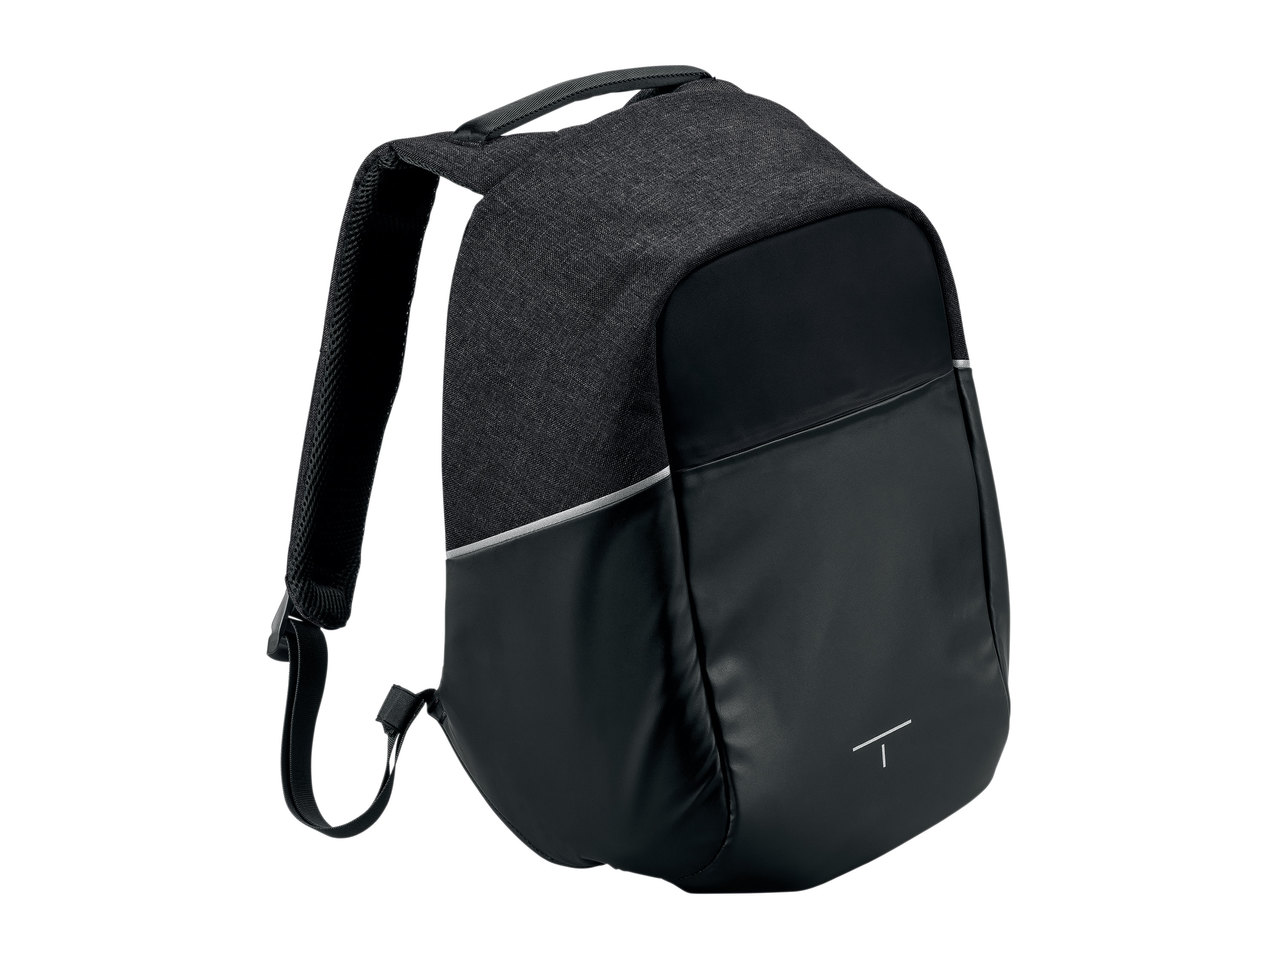 Top Move Anti-Theft Backpack1